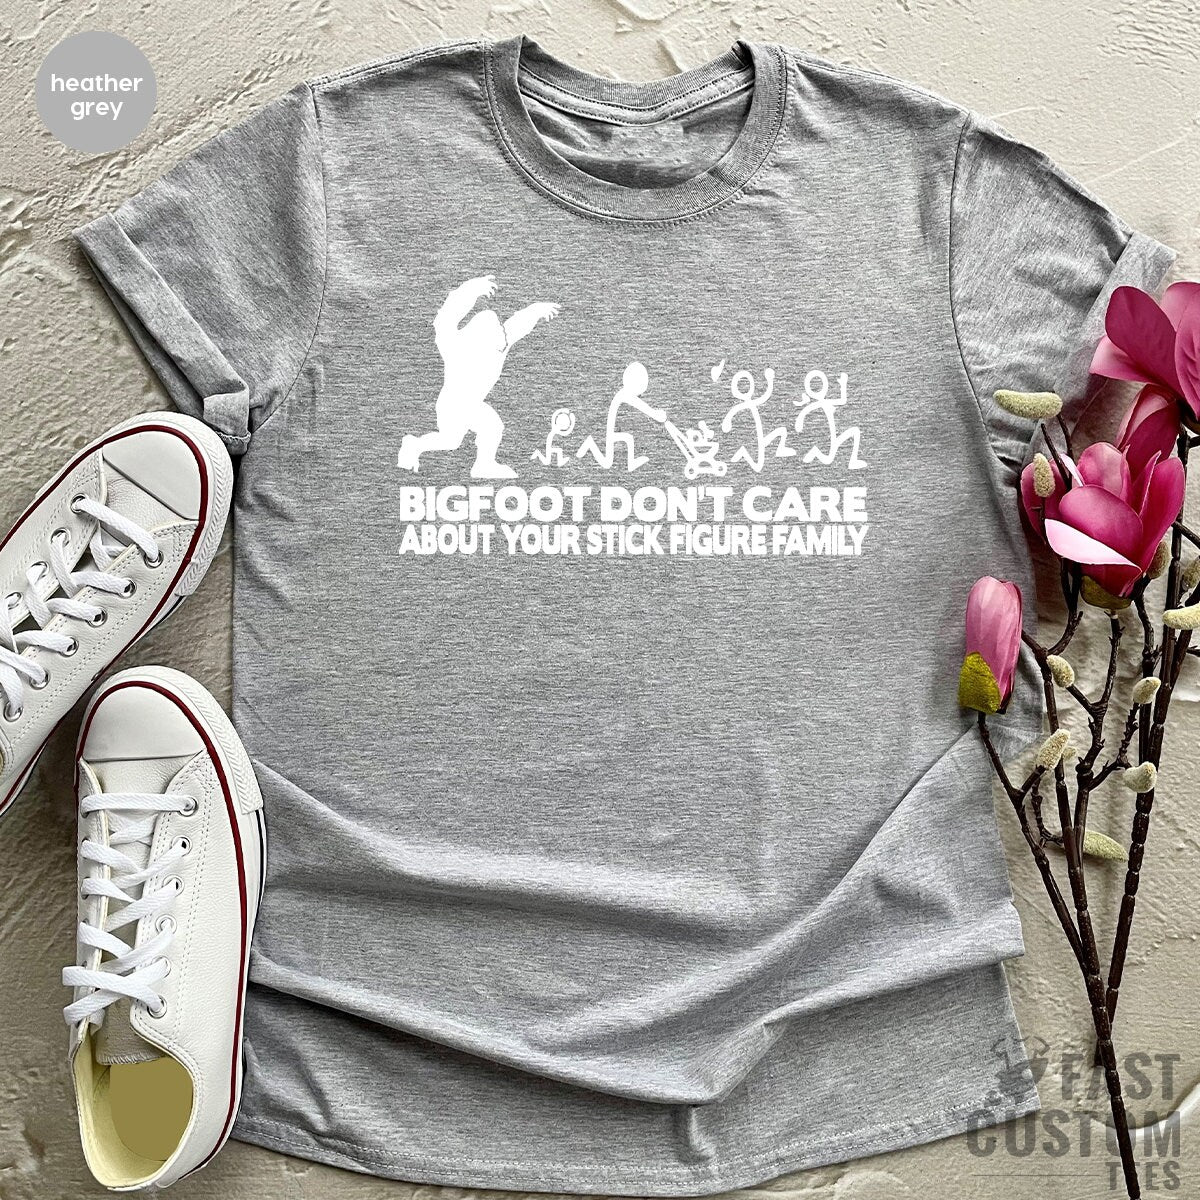 Funny Family Shirt, Big Foot T Shirt, Family Gifts, Bigfoot Doesn't Care Your Stick Family Figure Family Tee, Sasquatch TShirt - Fastdeliverytees.com